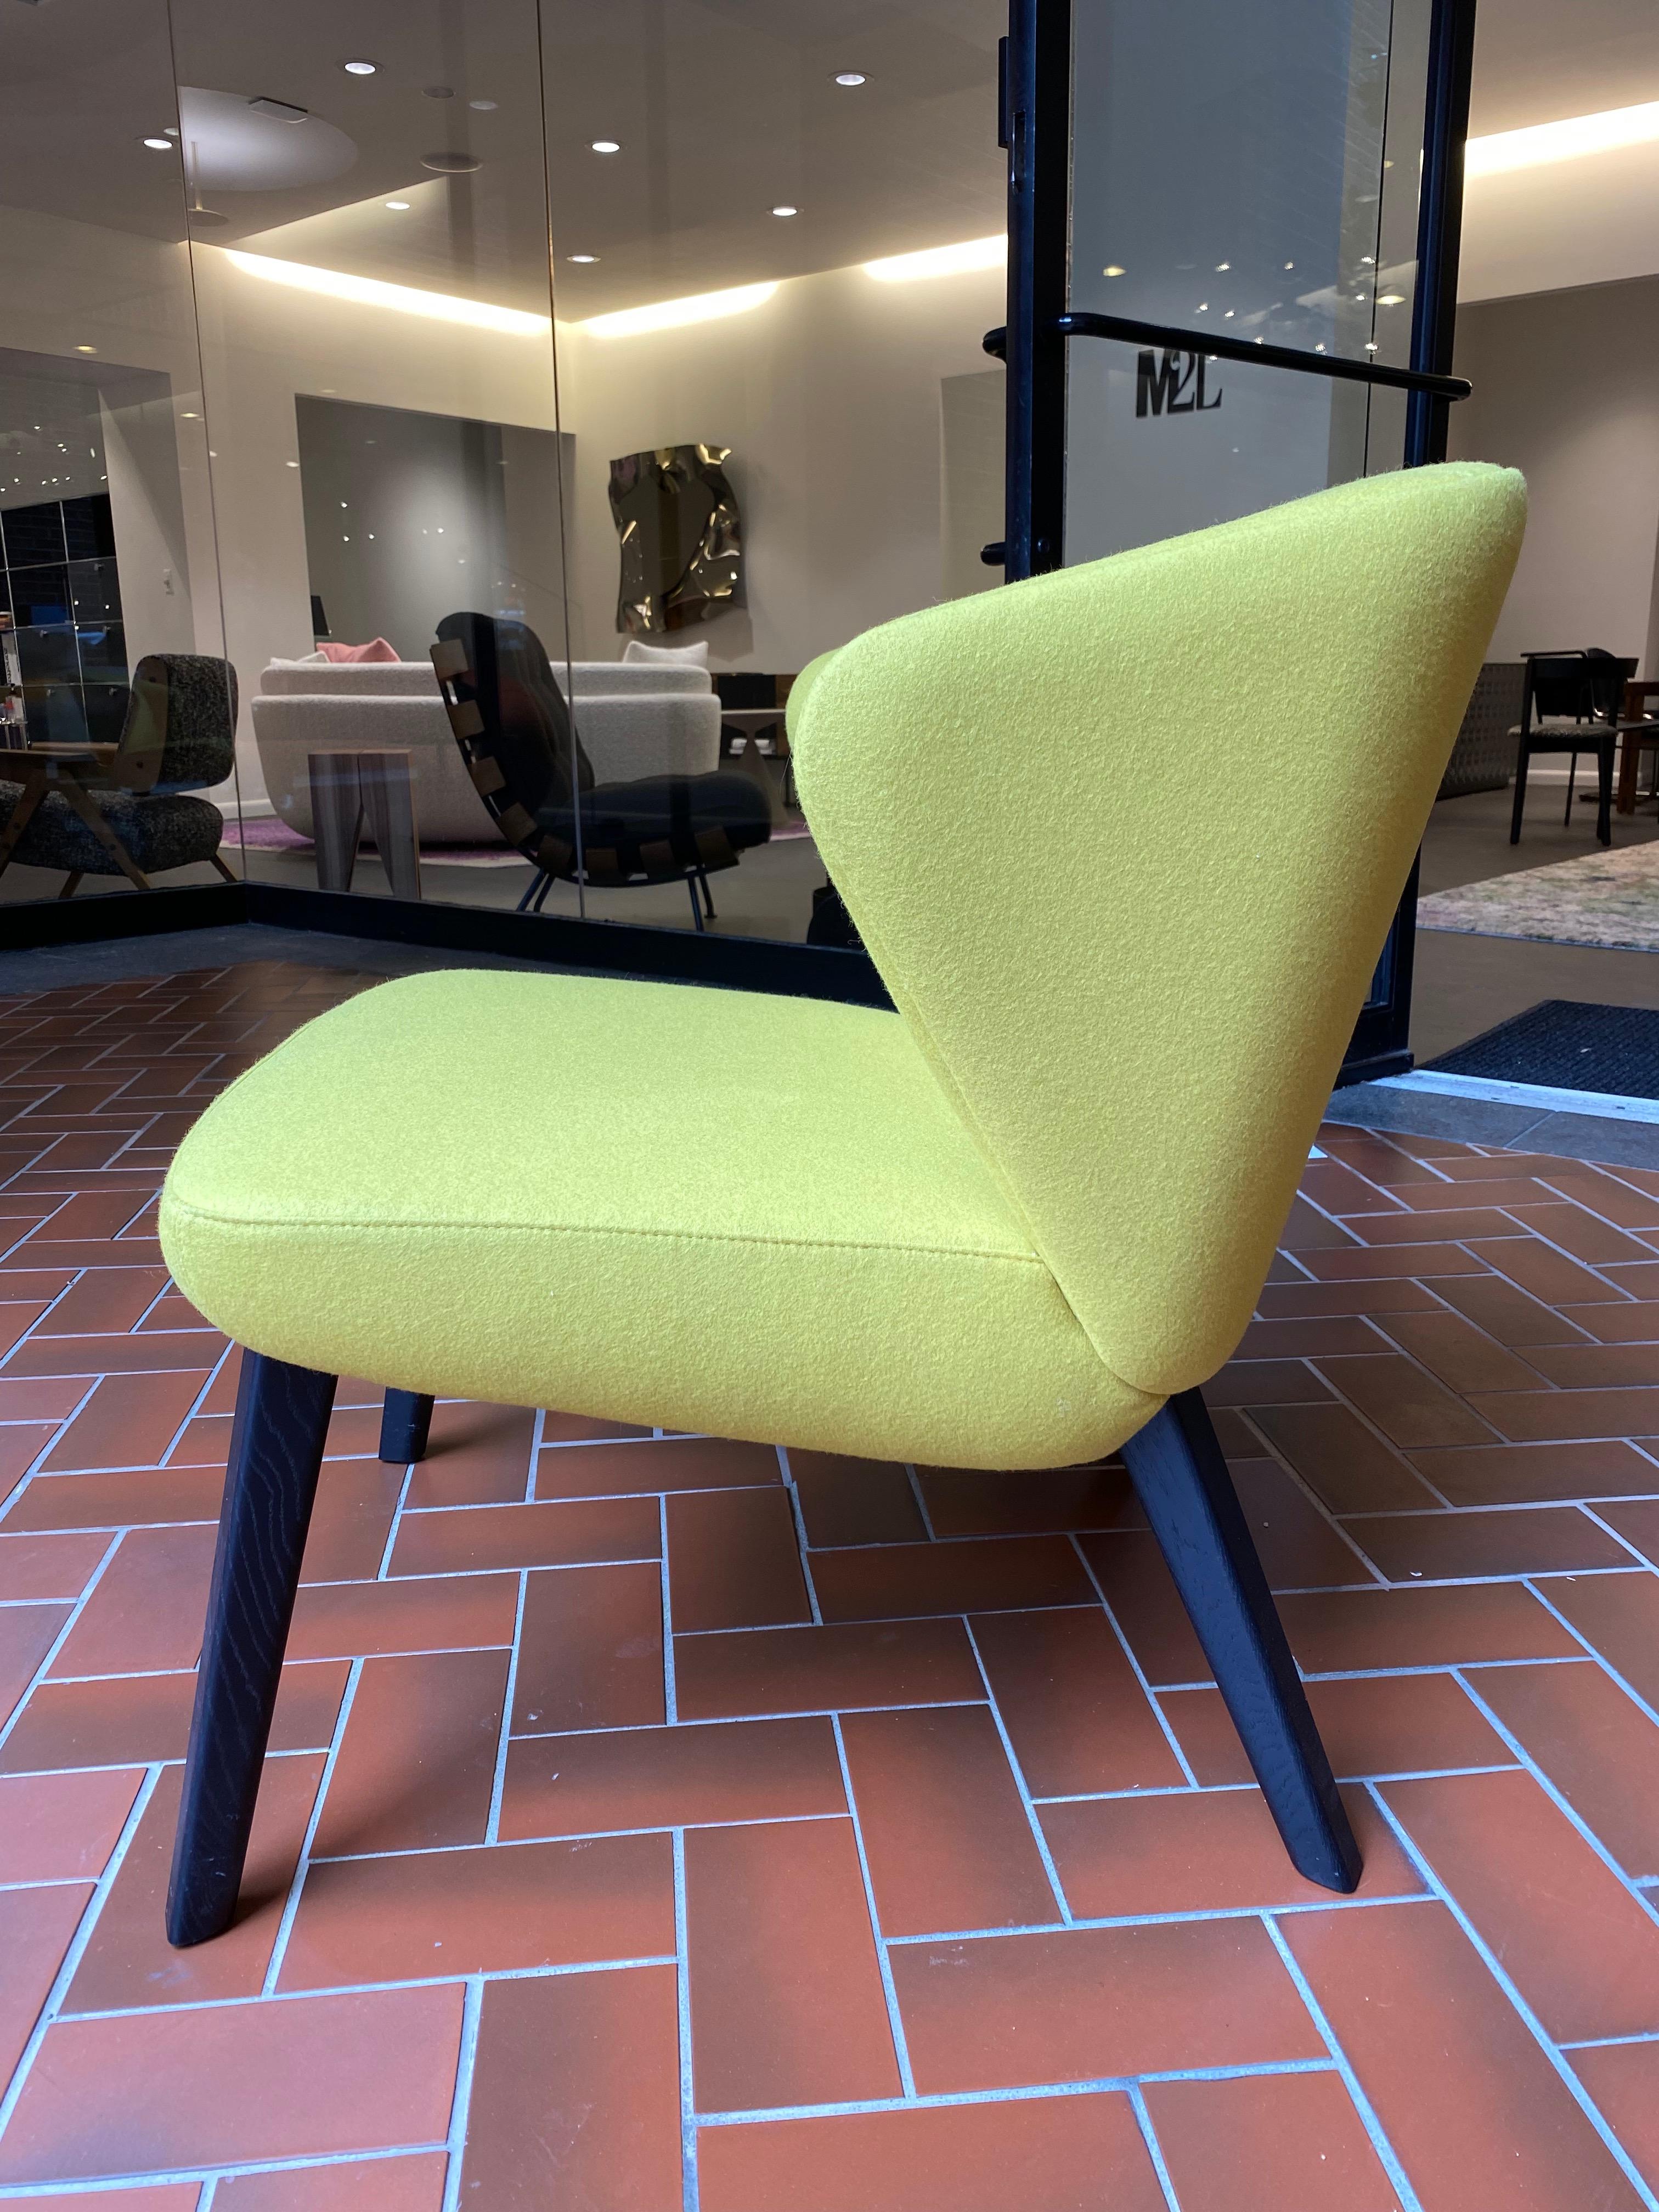 Back Me Up Salon
Upholstery: HERO 466318 #791
Base: Oak Black carbon stained
The compact club chair
With the BACK ME UP Salon, Arian Brekveld puts a contemporary spin on the voluminous club chair.
Its whispering design allows you room to